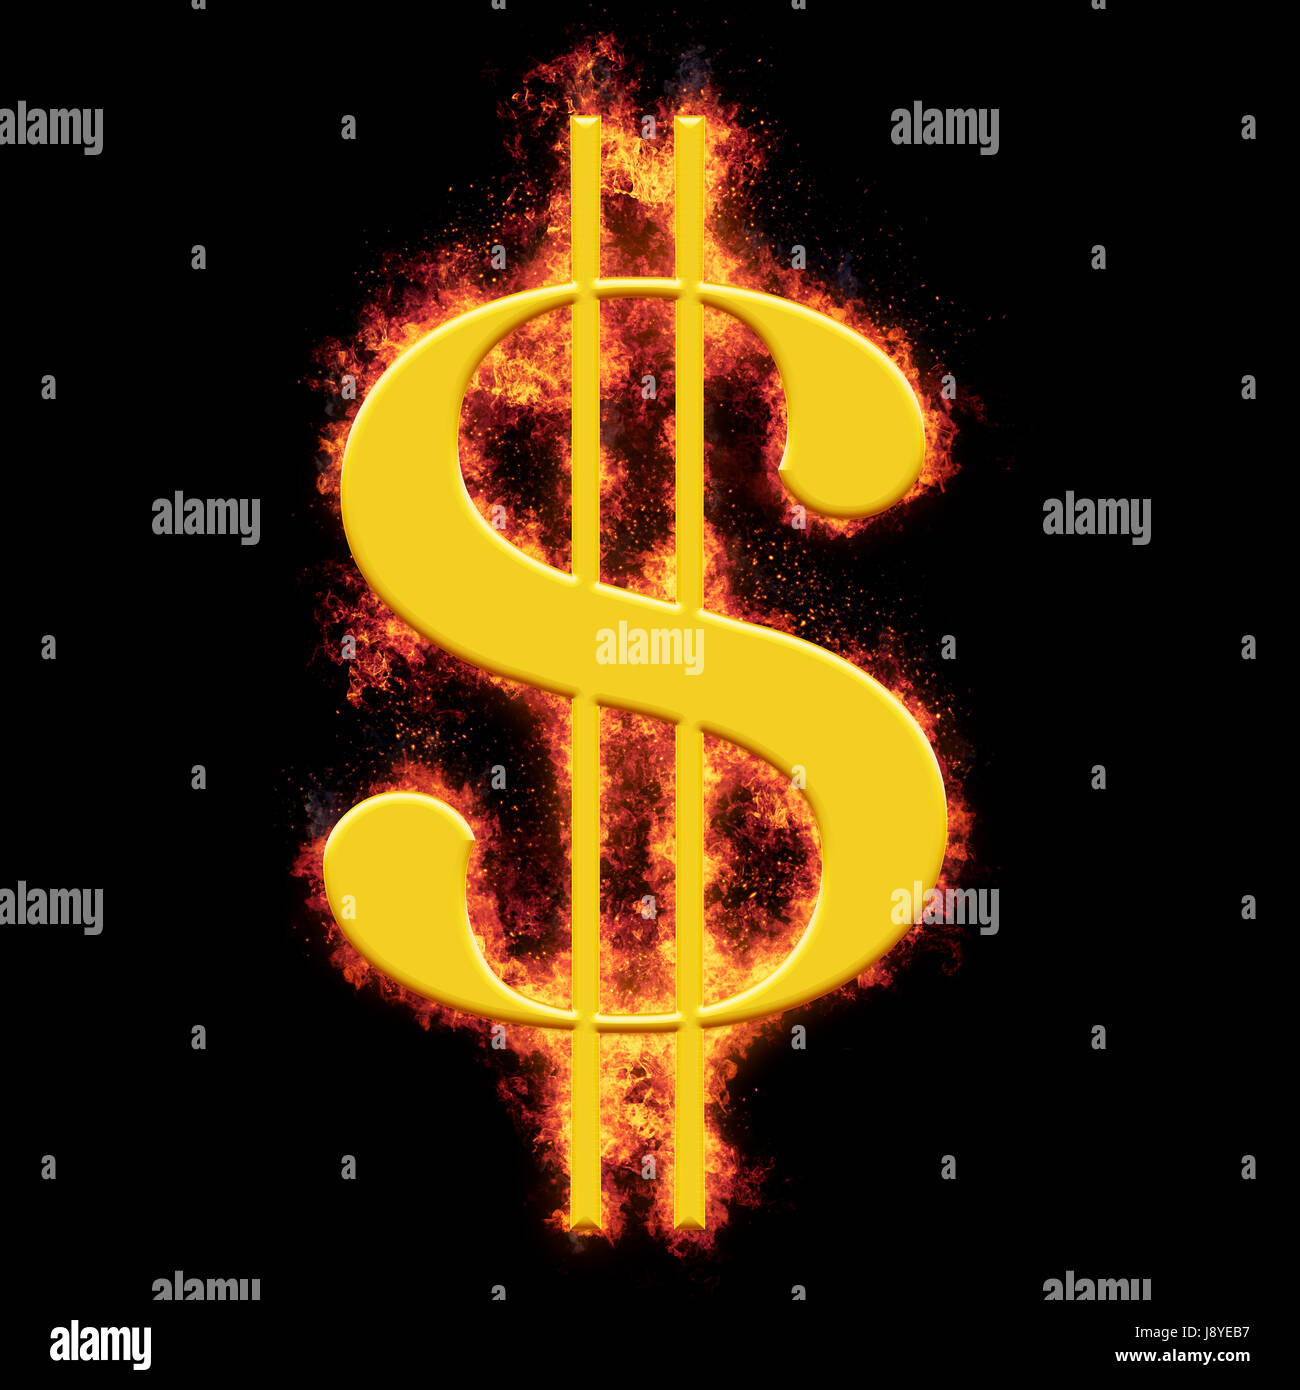 Golden American dollar symbol in bursting flames, isolated against the black background Stock Photo